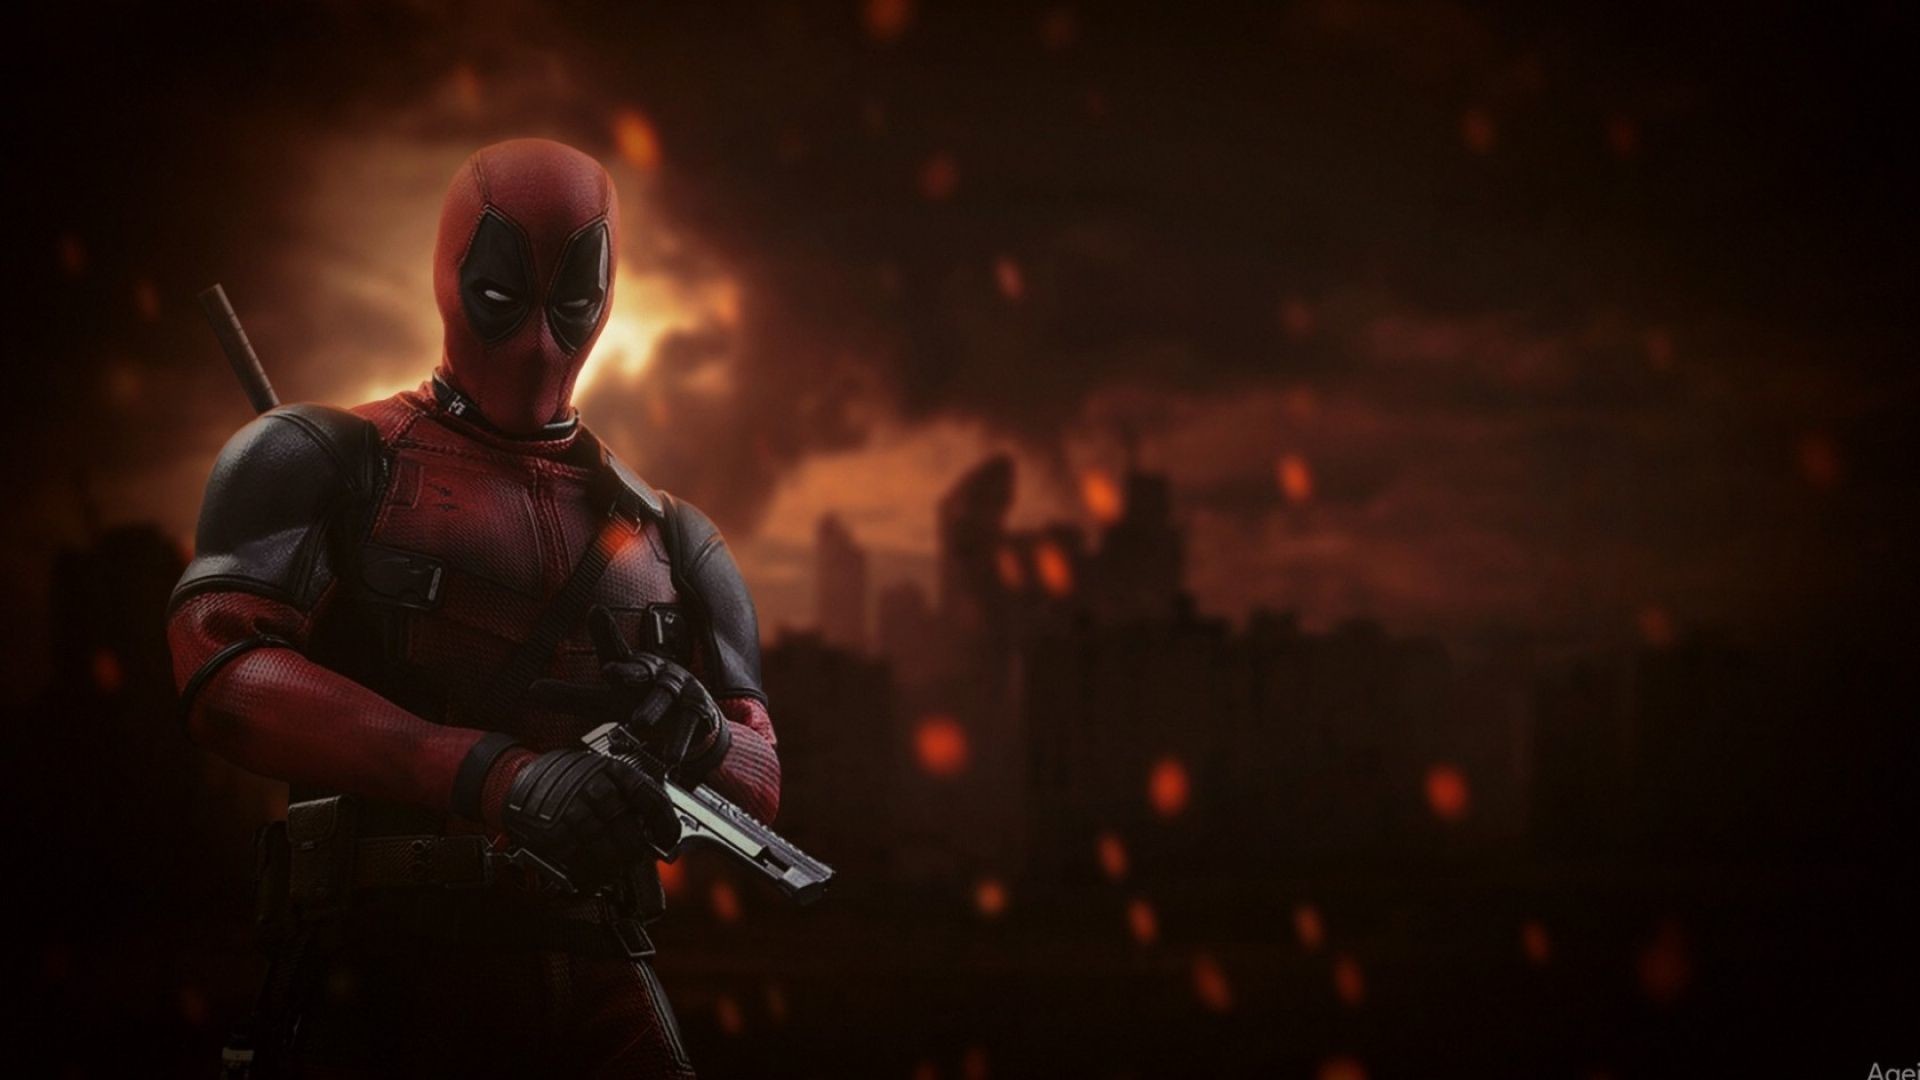  Deadpool 1080P Wallpapers on WallpaperPlay